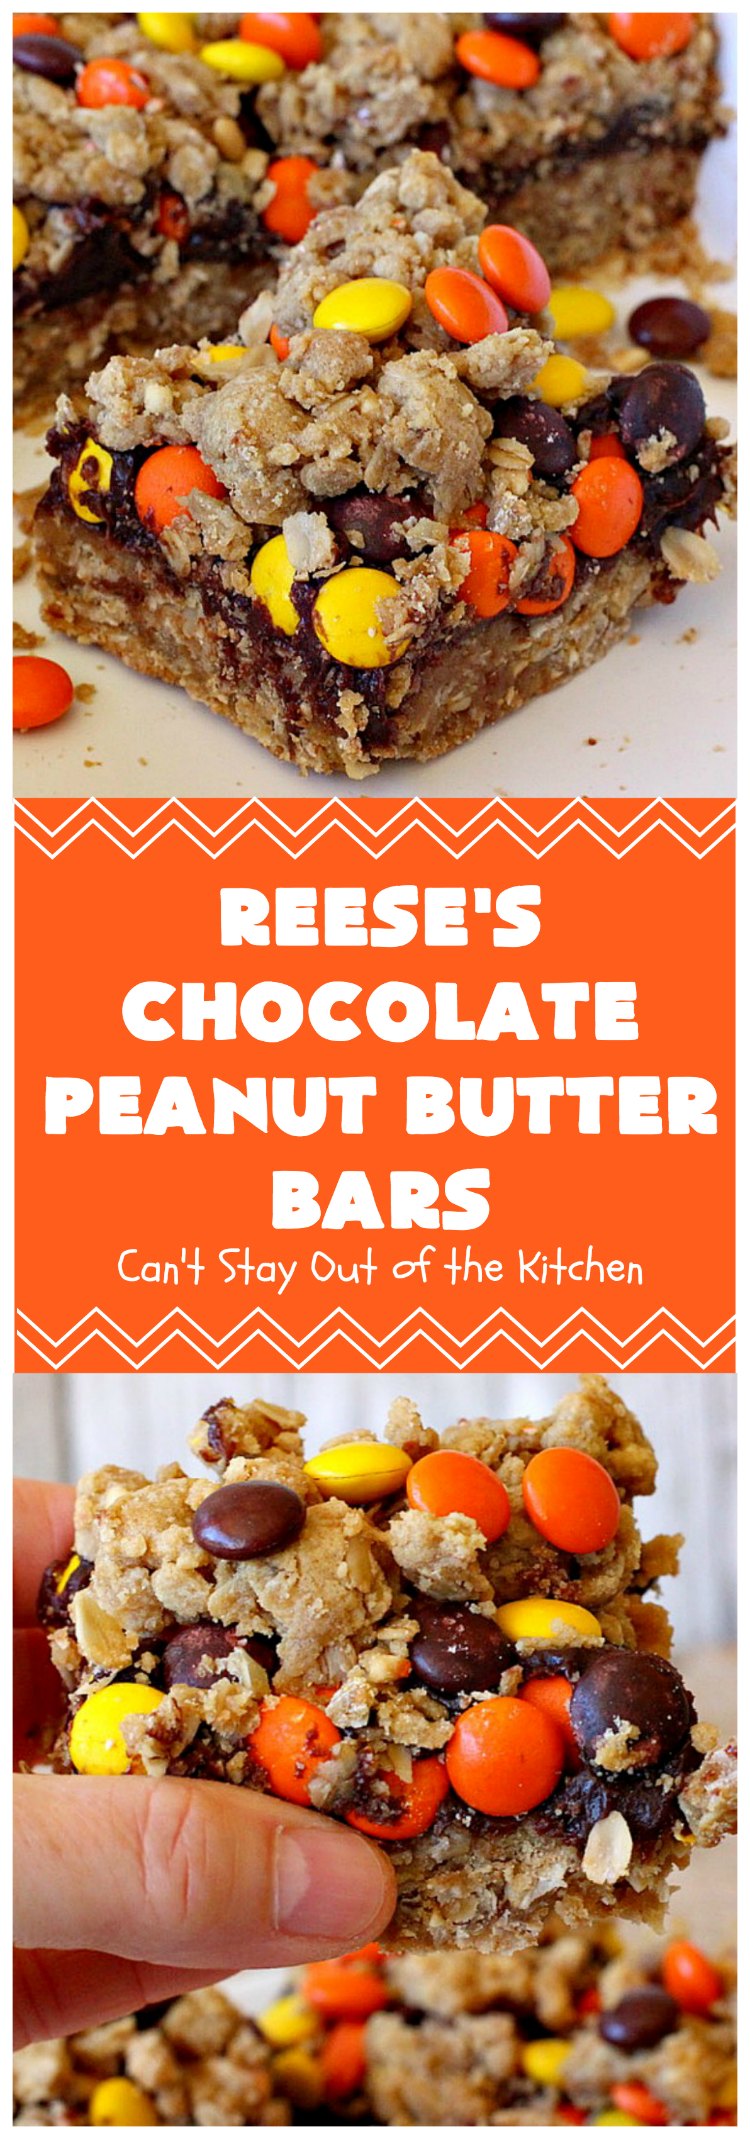 Reese's Chocolate Peanut Butter Bars | Can't Stay Out of the Kitchen | these outrageous #cookies start with an #OatmealCookie & #PeanutButter crust & topping. They have a #chocolate sauce & #ReesesPeanutButterCandies in the middle. Absolutely awesome! #tailgating #brownie #dessert #ChocolateDessert #PeanutButterDessert #ReesesPeanutButterDessert #ReesesChocolatePeanutButterBars